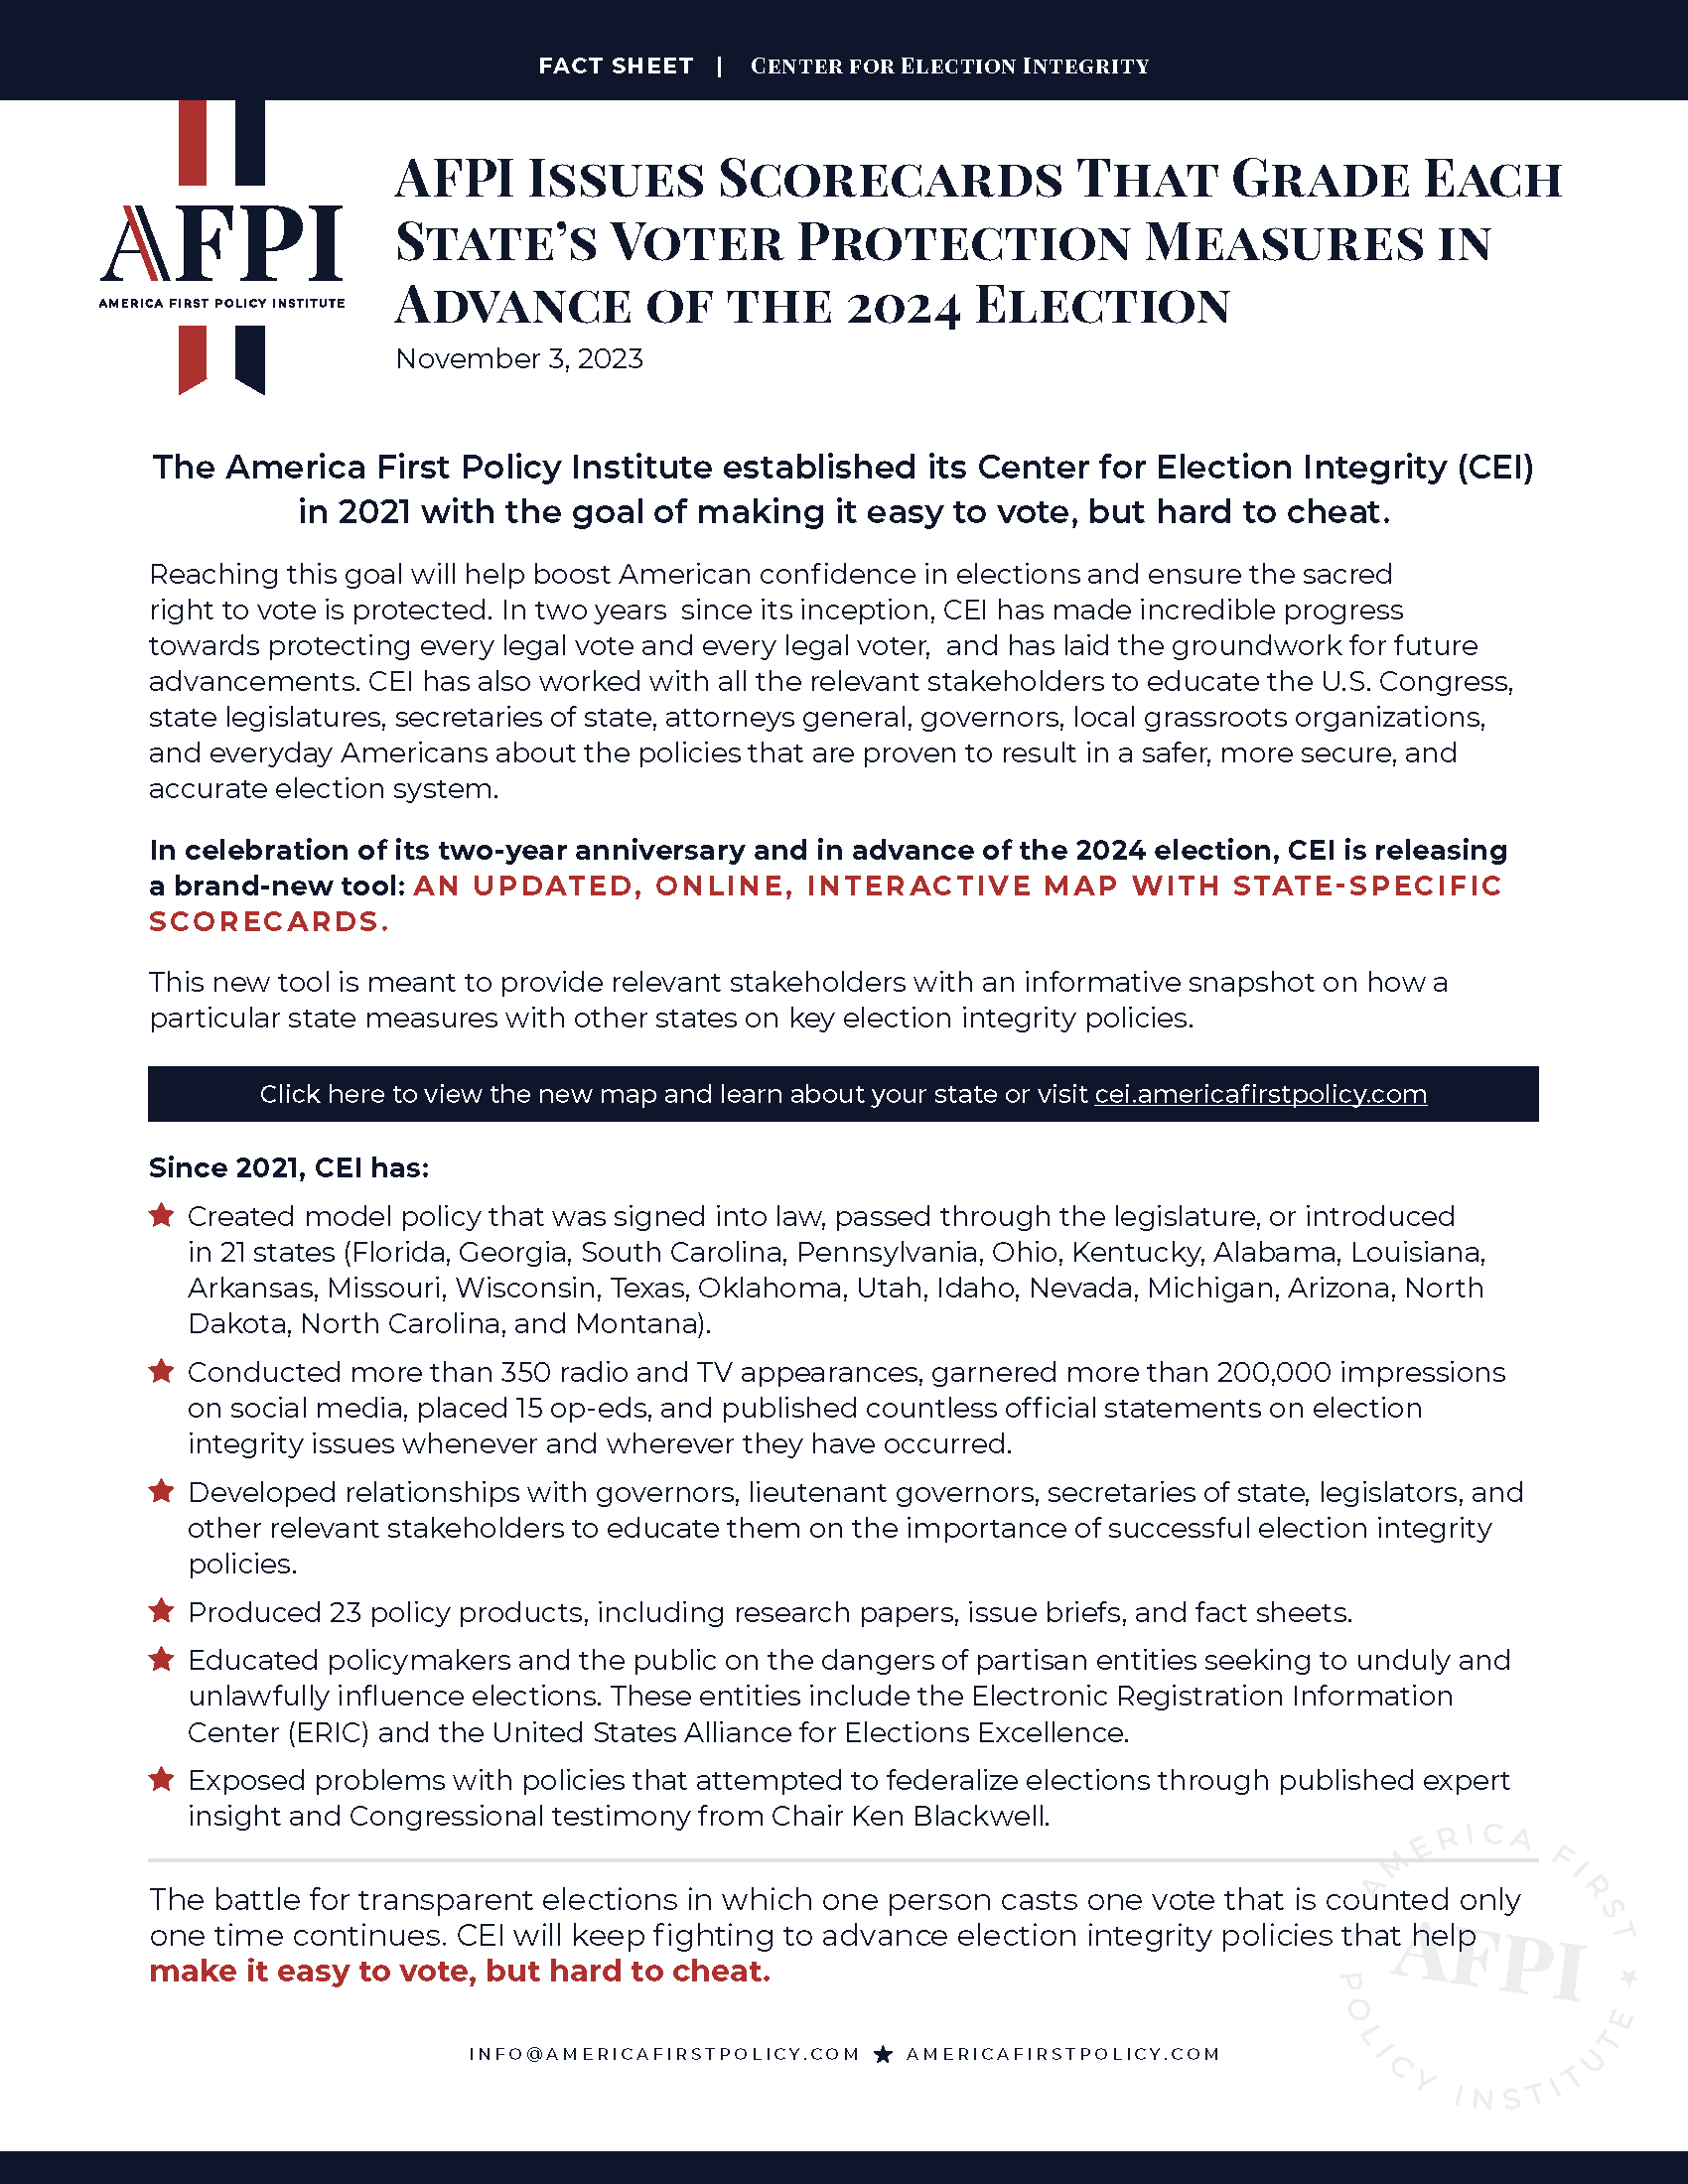 AFPI Issues Scorecards That Grade Each State’s Voter Protection